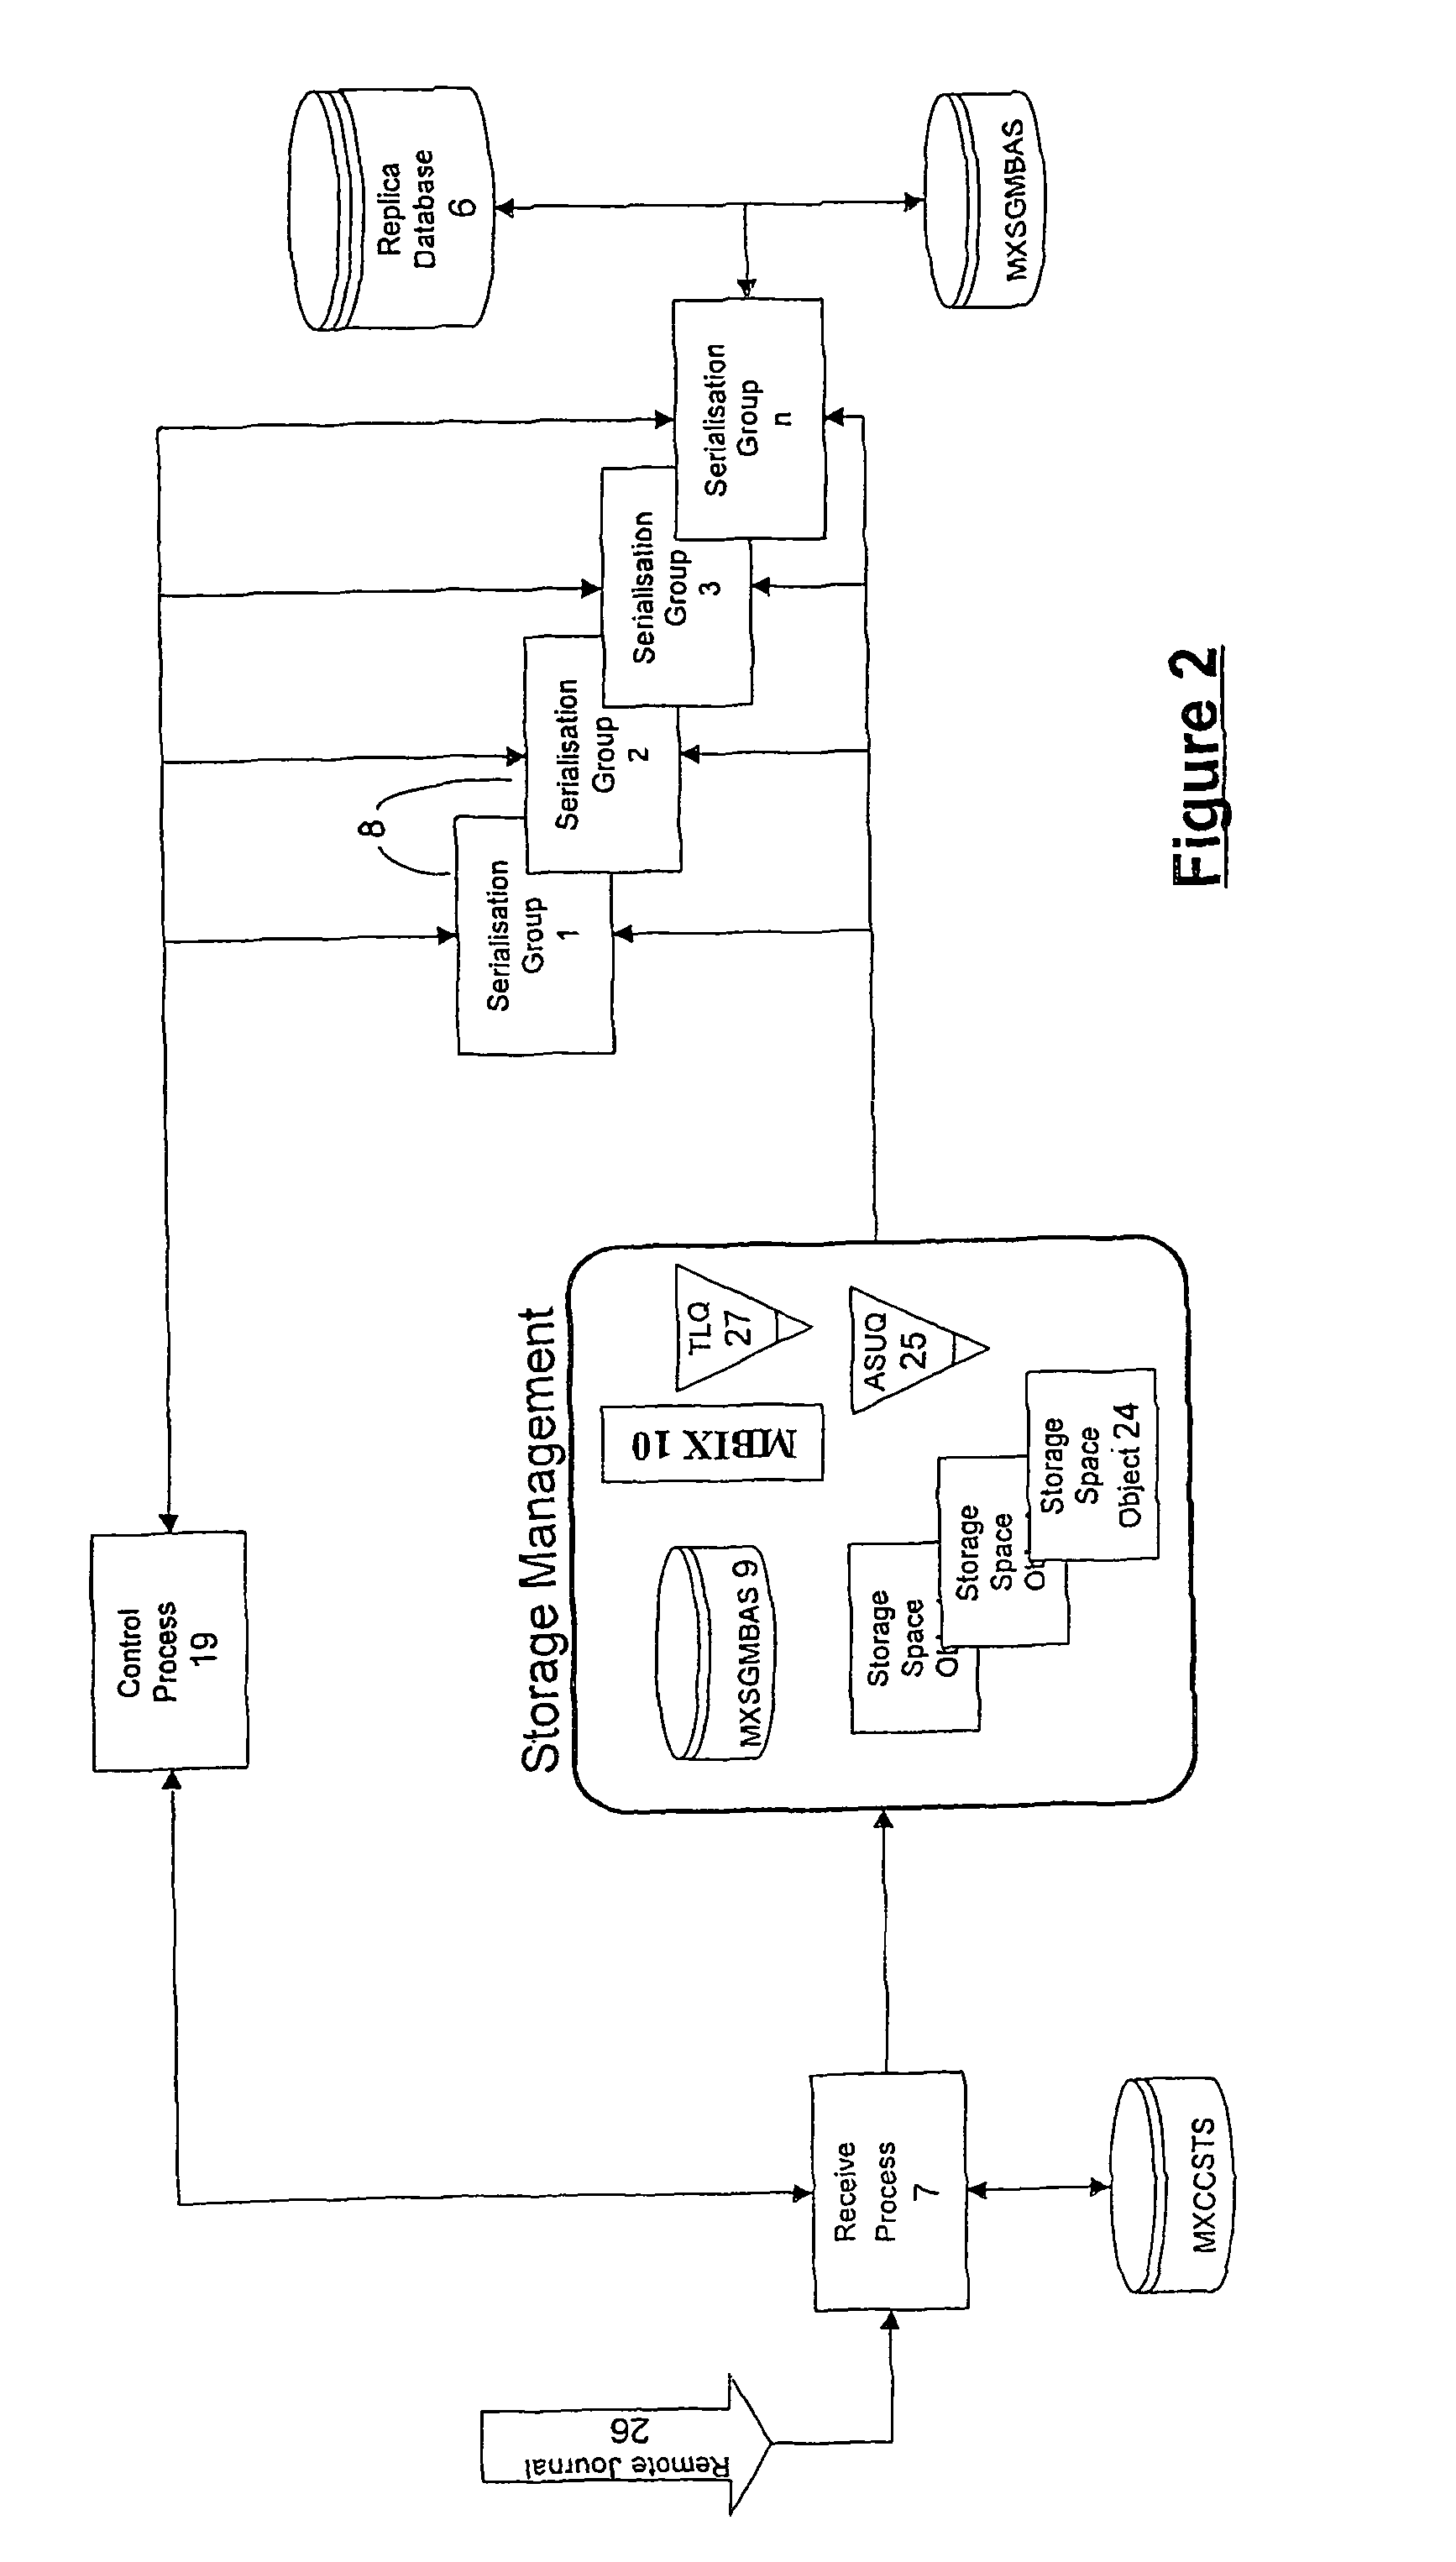 Method and apparatus for data processing